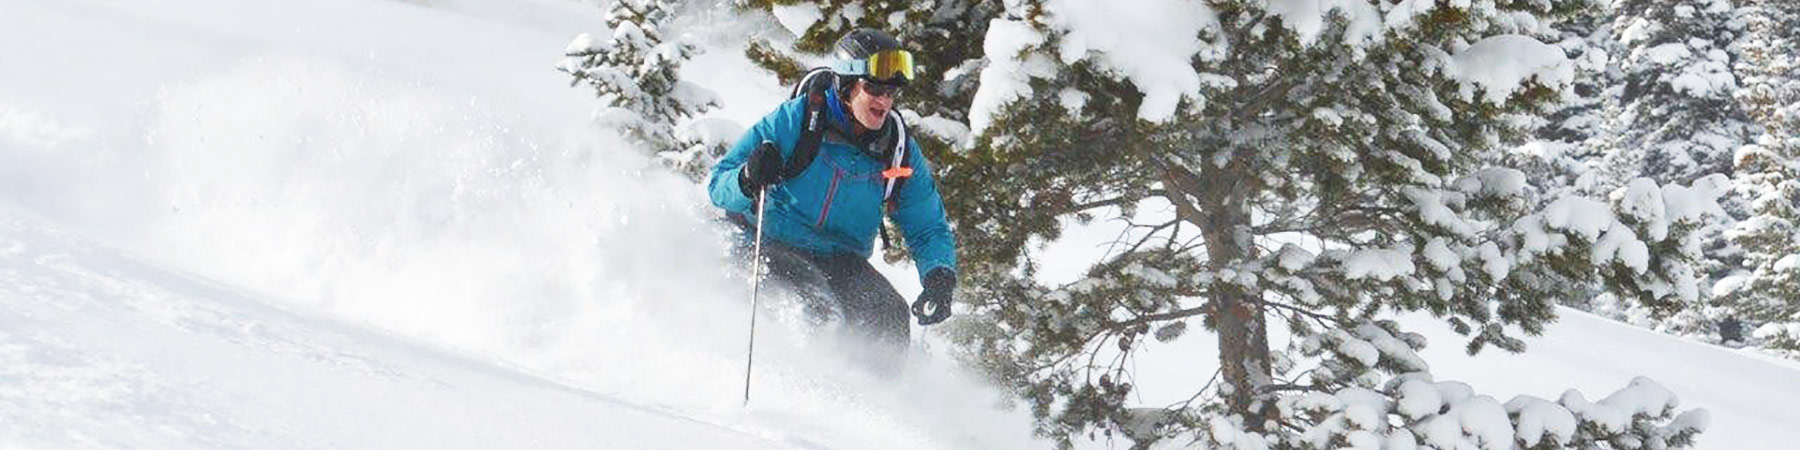 Pierre Wille skis the powder that makes Aspen skiing world famous